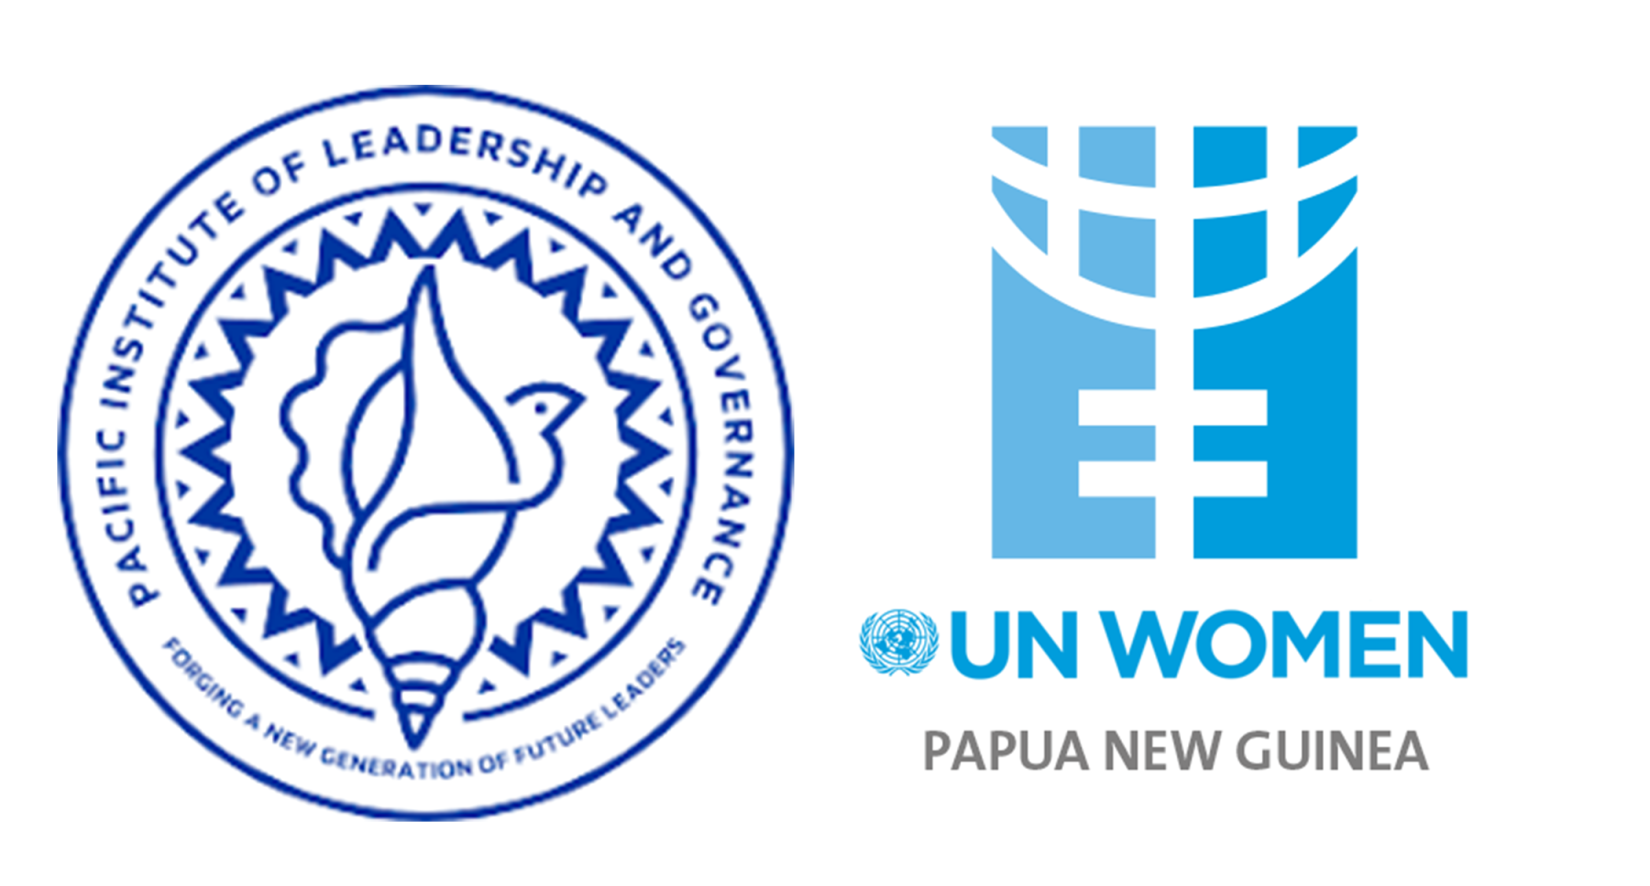 UN Women & Pacific Institute of Leadership and Governance logo